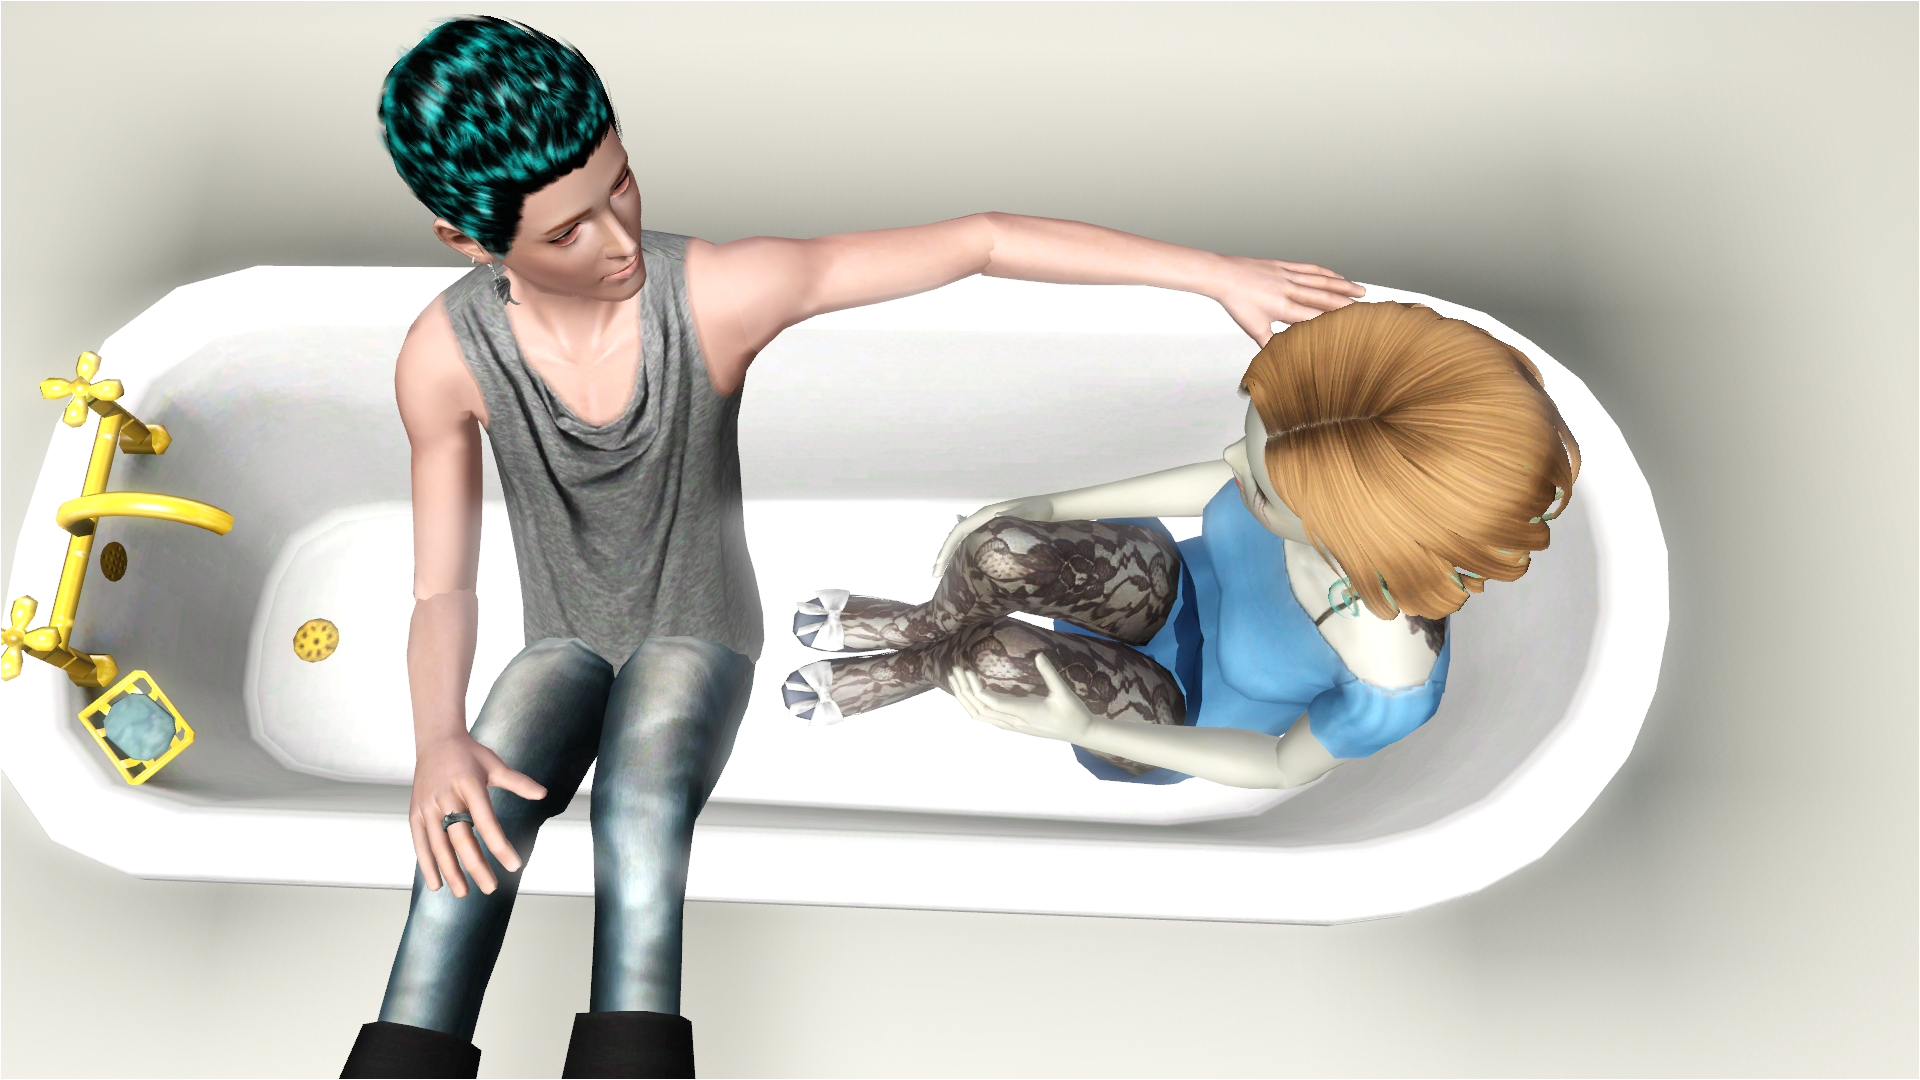 bath time minus water pose pack